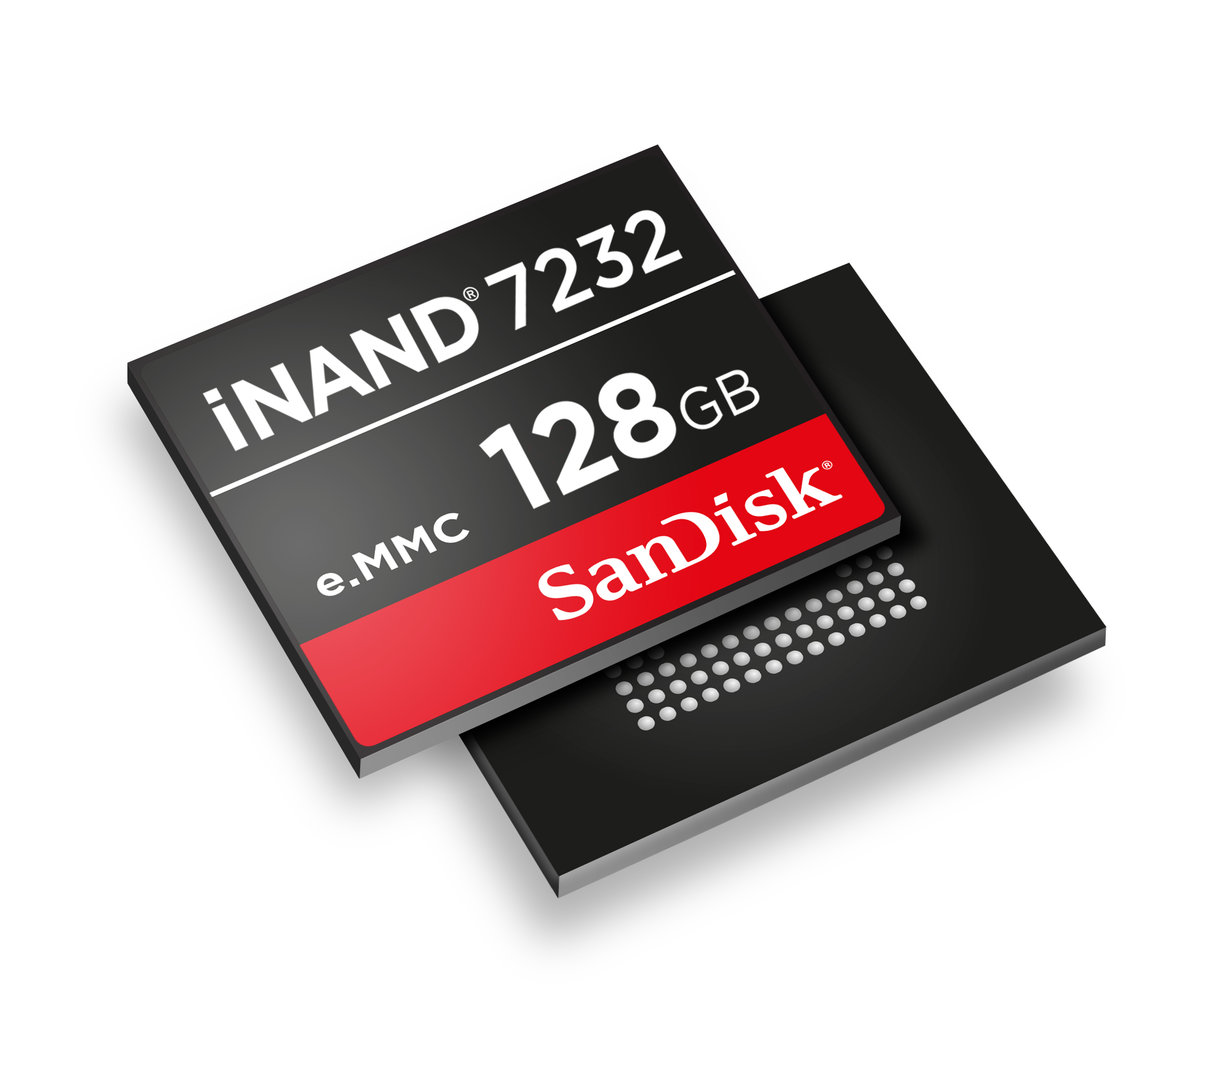 SanDisk iNAND 7232